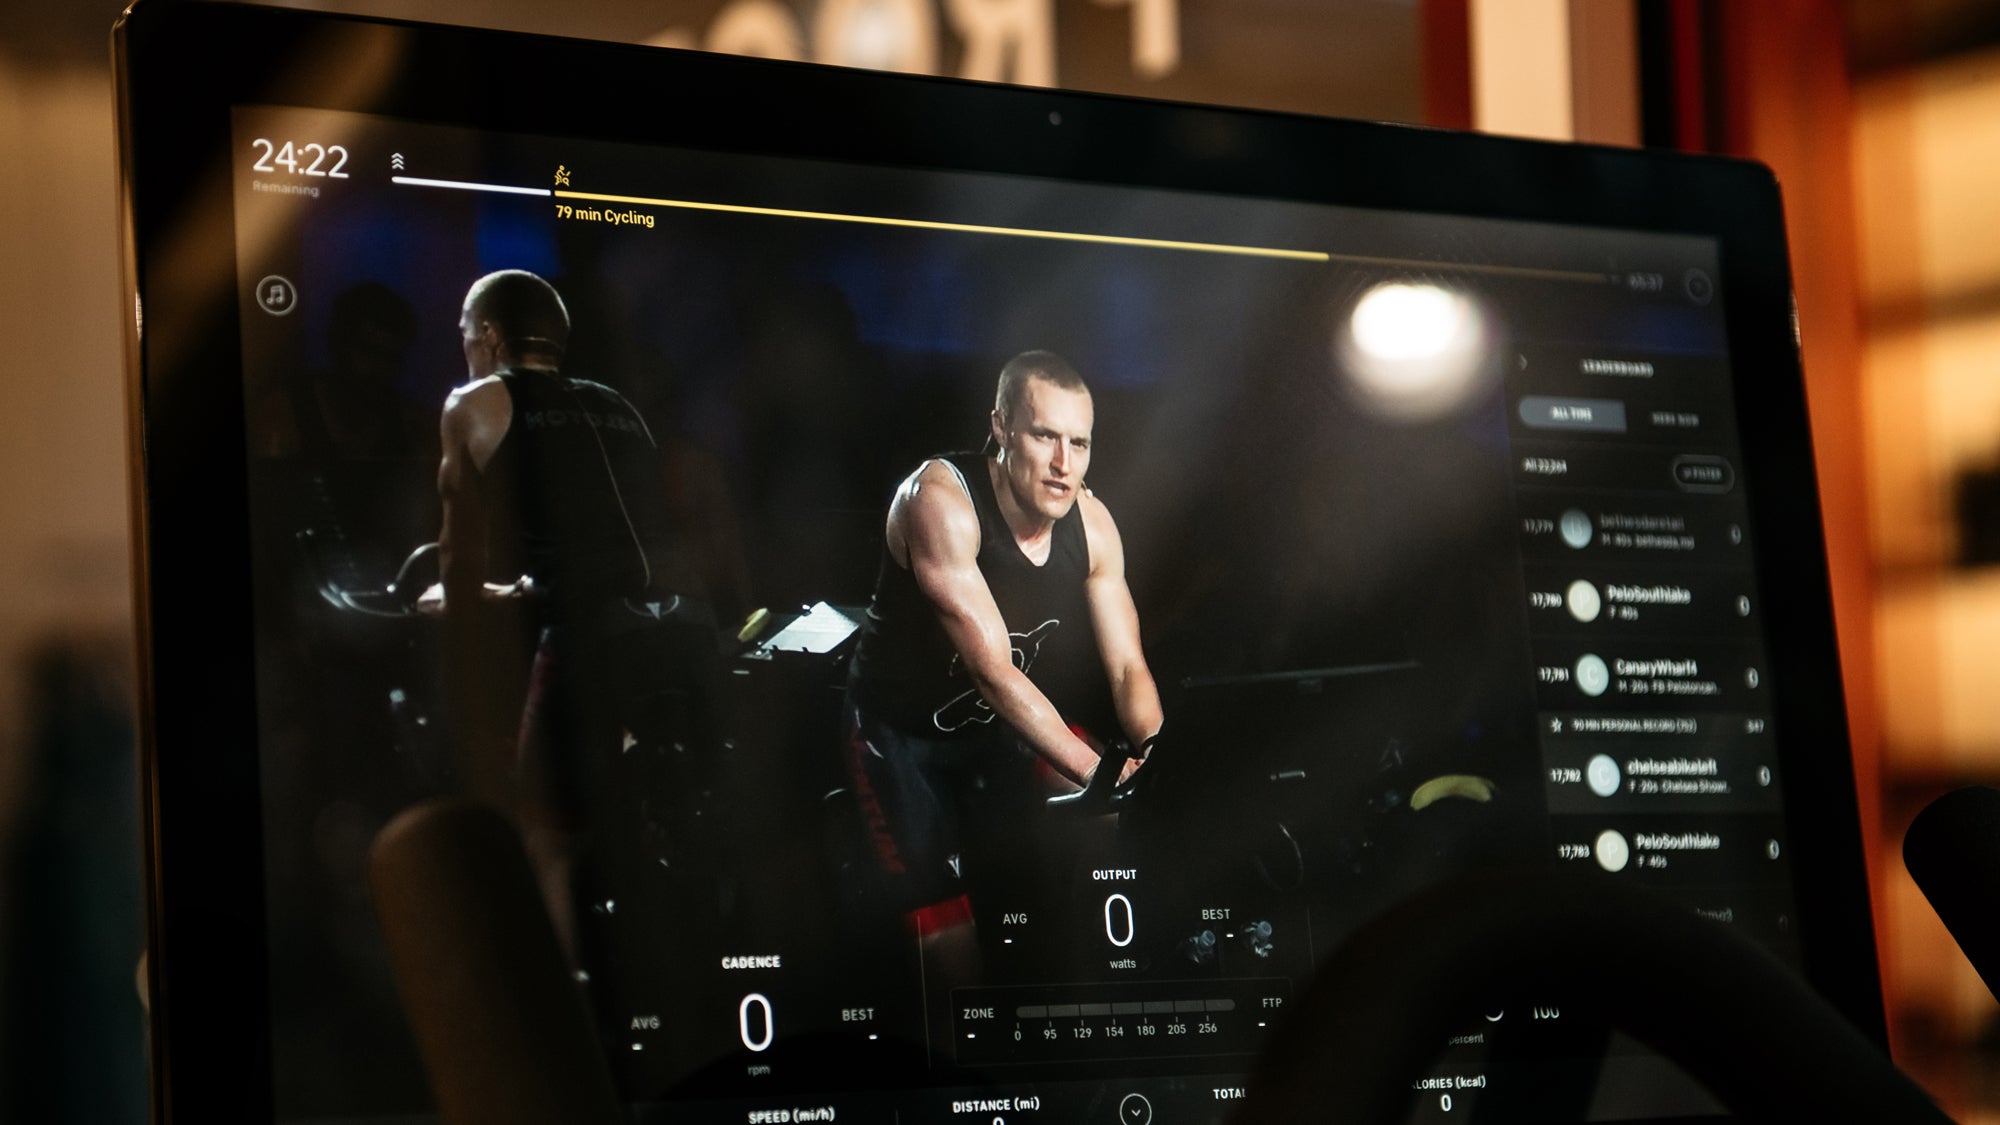 Peloton for Triathletes: Could It Work as a Training Tool? – Triathlete